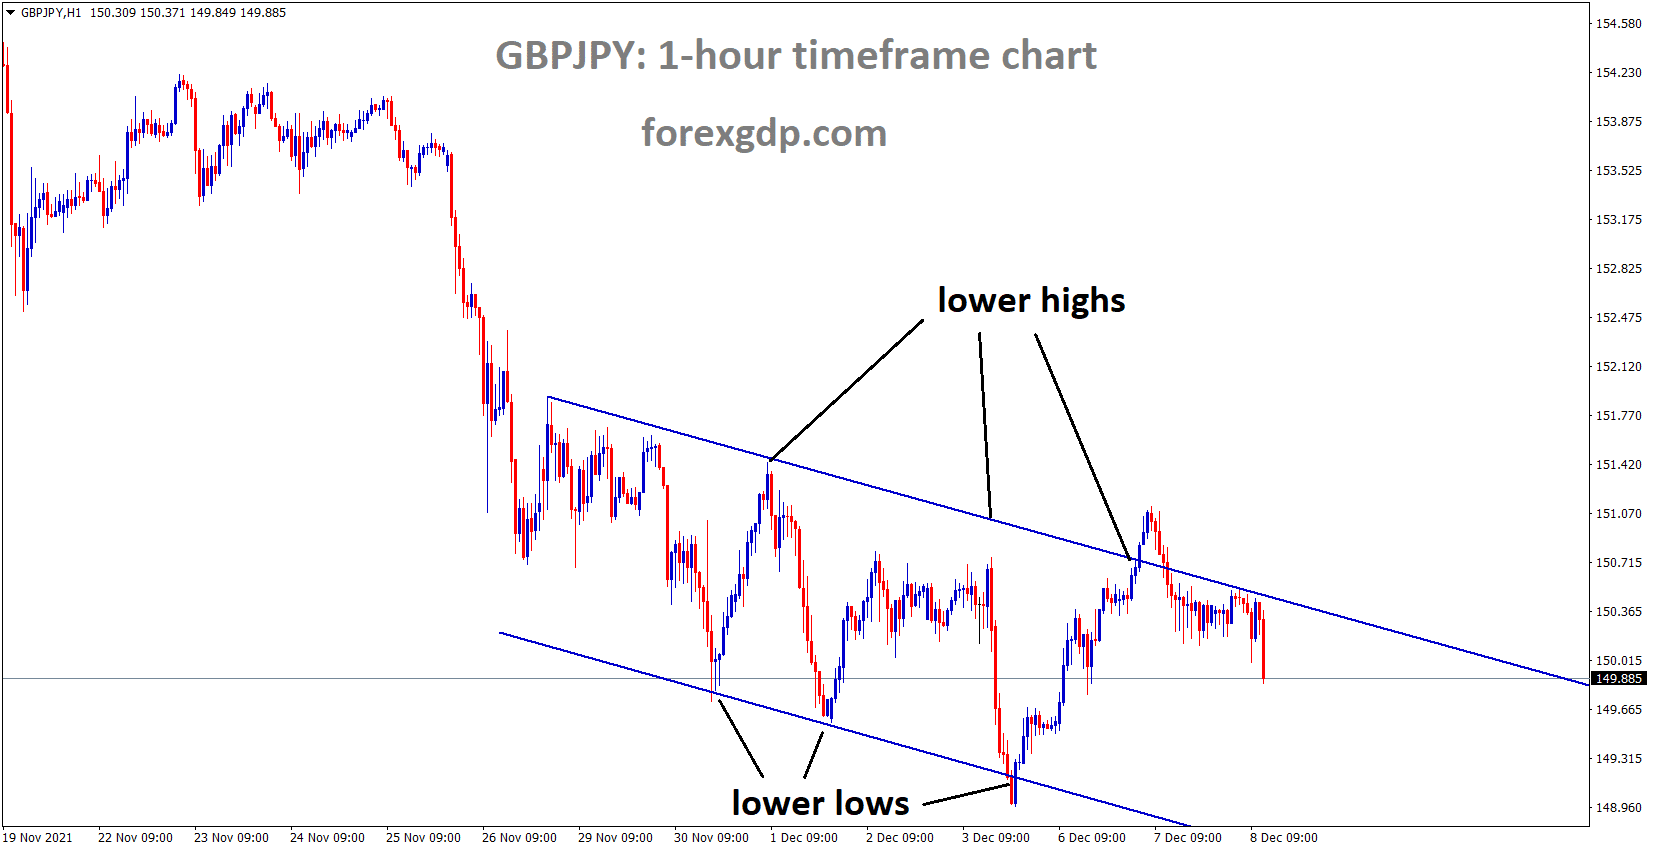 GBPJPY is moving in the Descending channel and the market falls from the lower high area of the channel